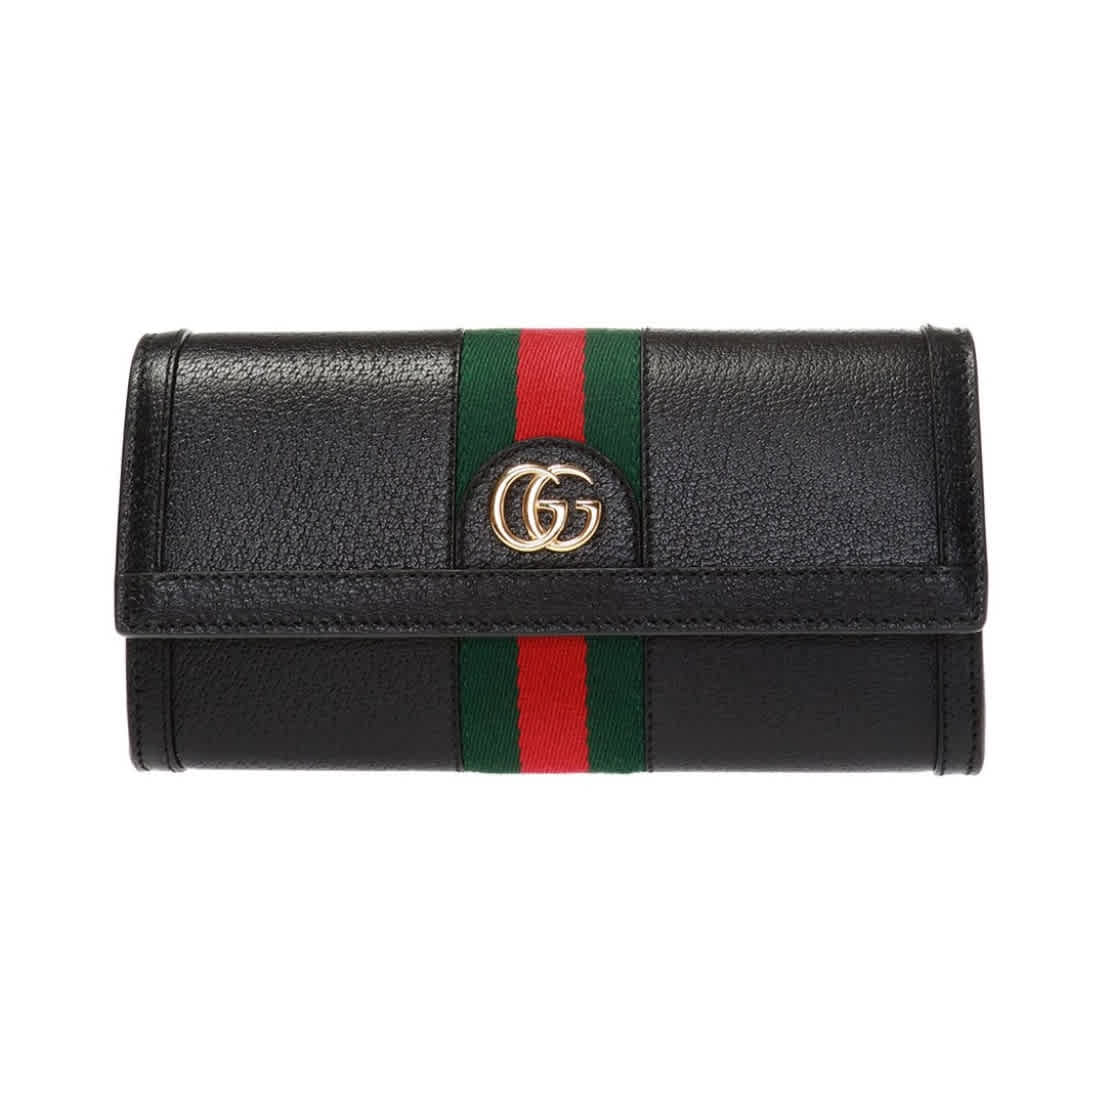 Gucci Black Leather Ophidia Continental Wallet In Black,green,red